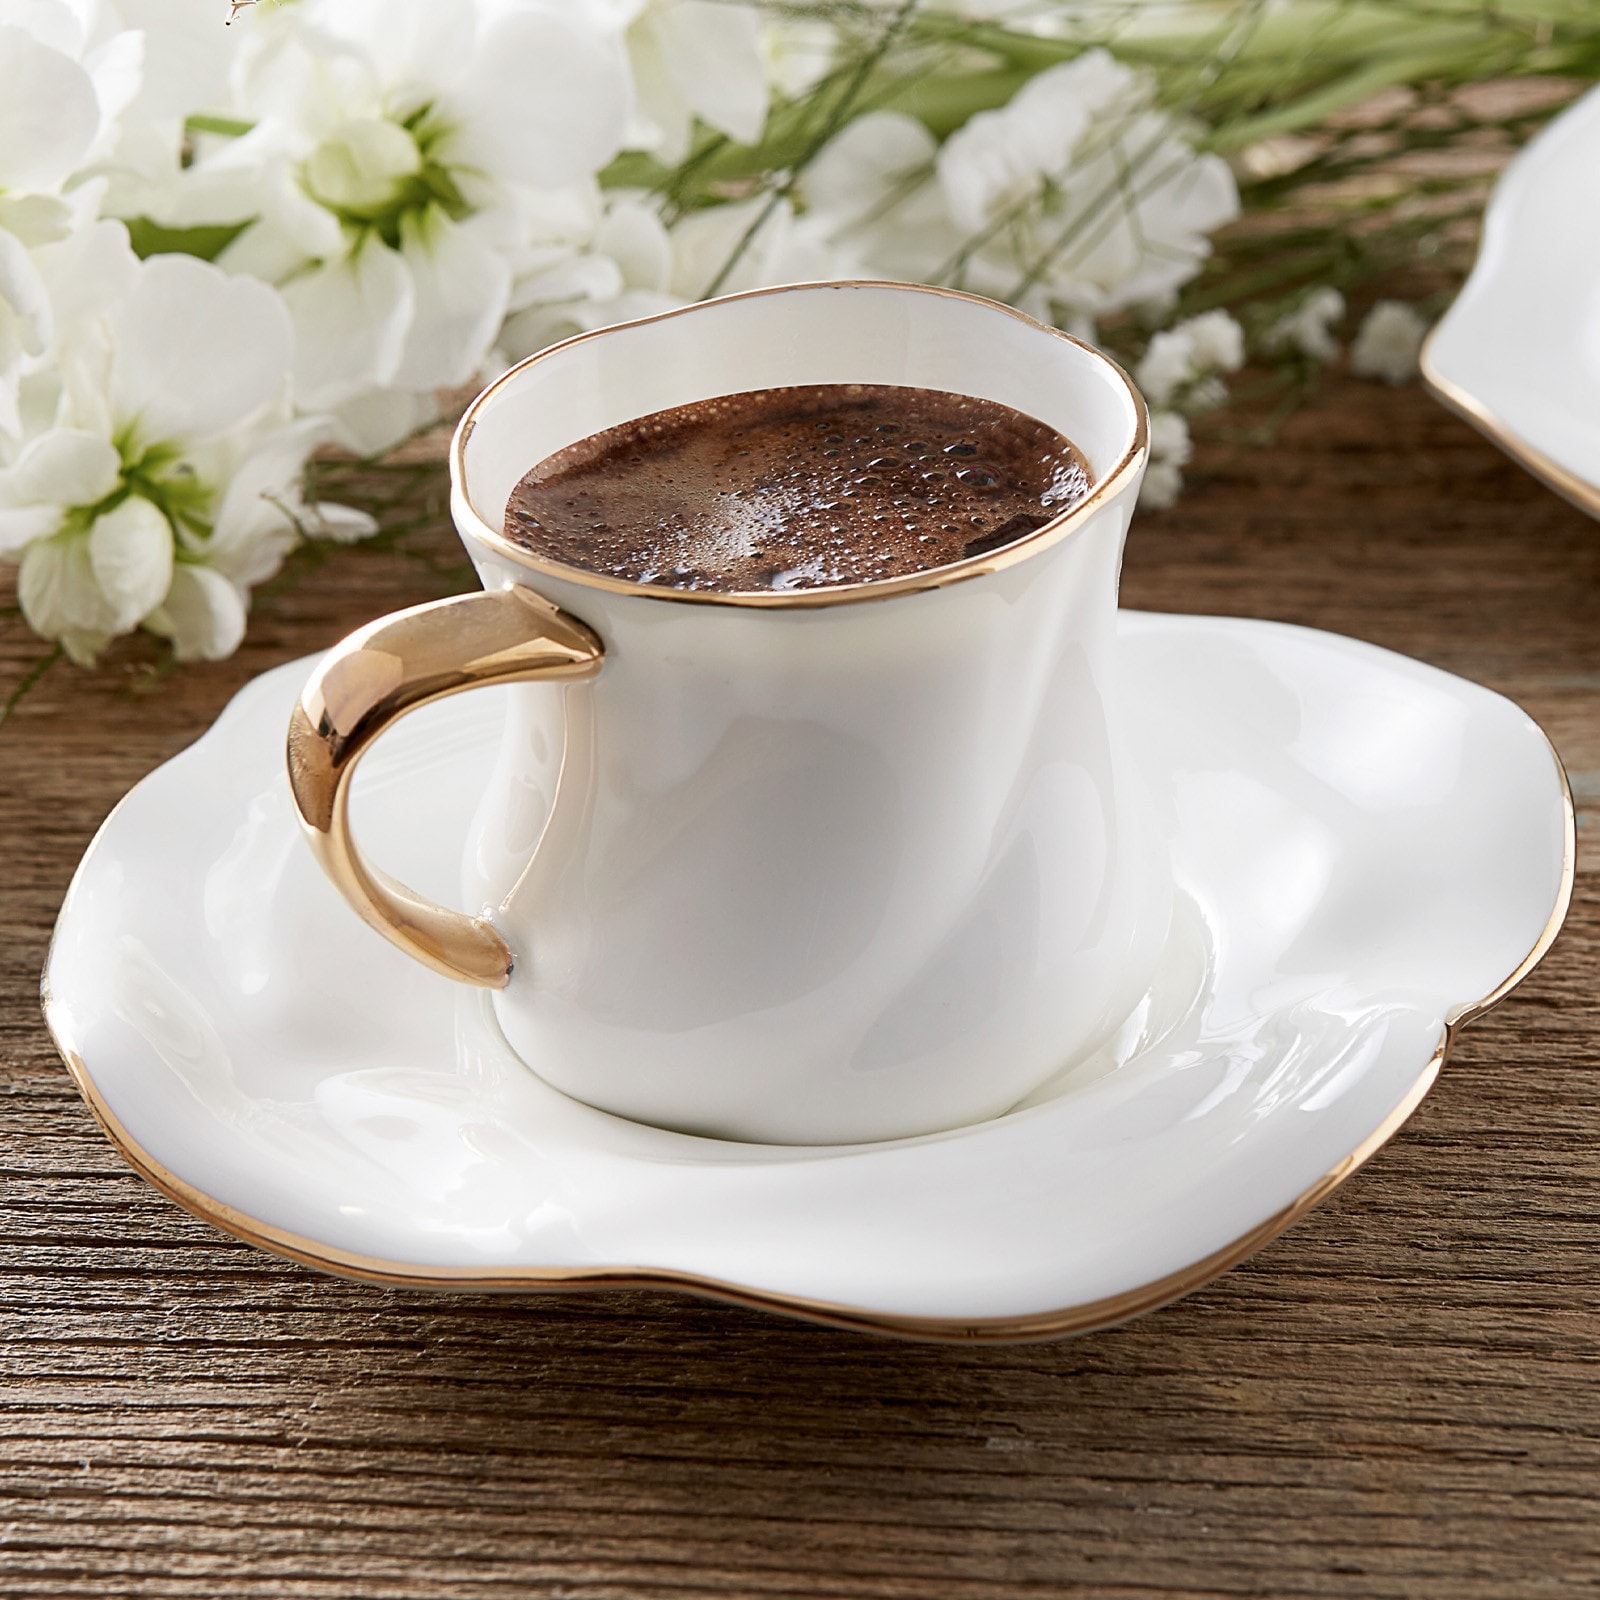 https://ak1.ostkcdn.com/images/products/is/images/direct/3a2a40102108dc1a4791dd69eb849346d9f74a76/Karaca-Flower-Gold-Rim-Bone-China-Coffee-Cup-Set-for-2.jpg